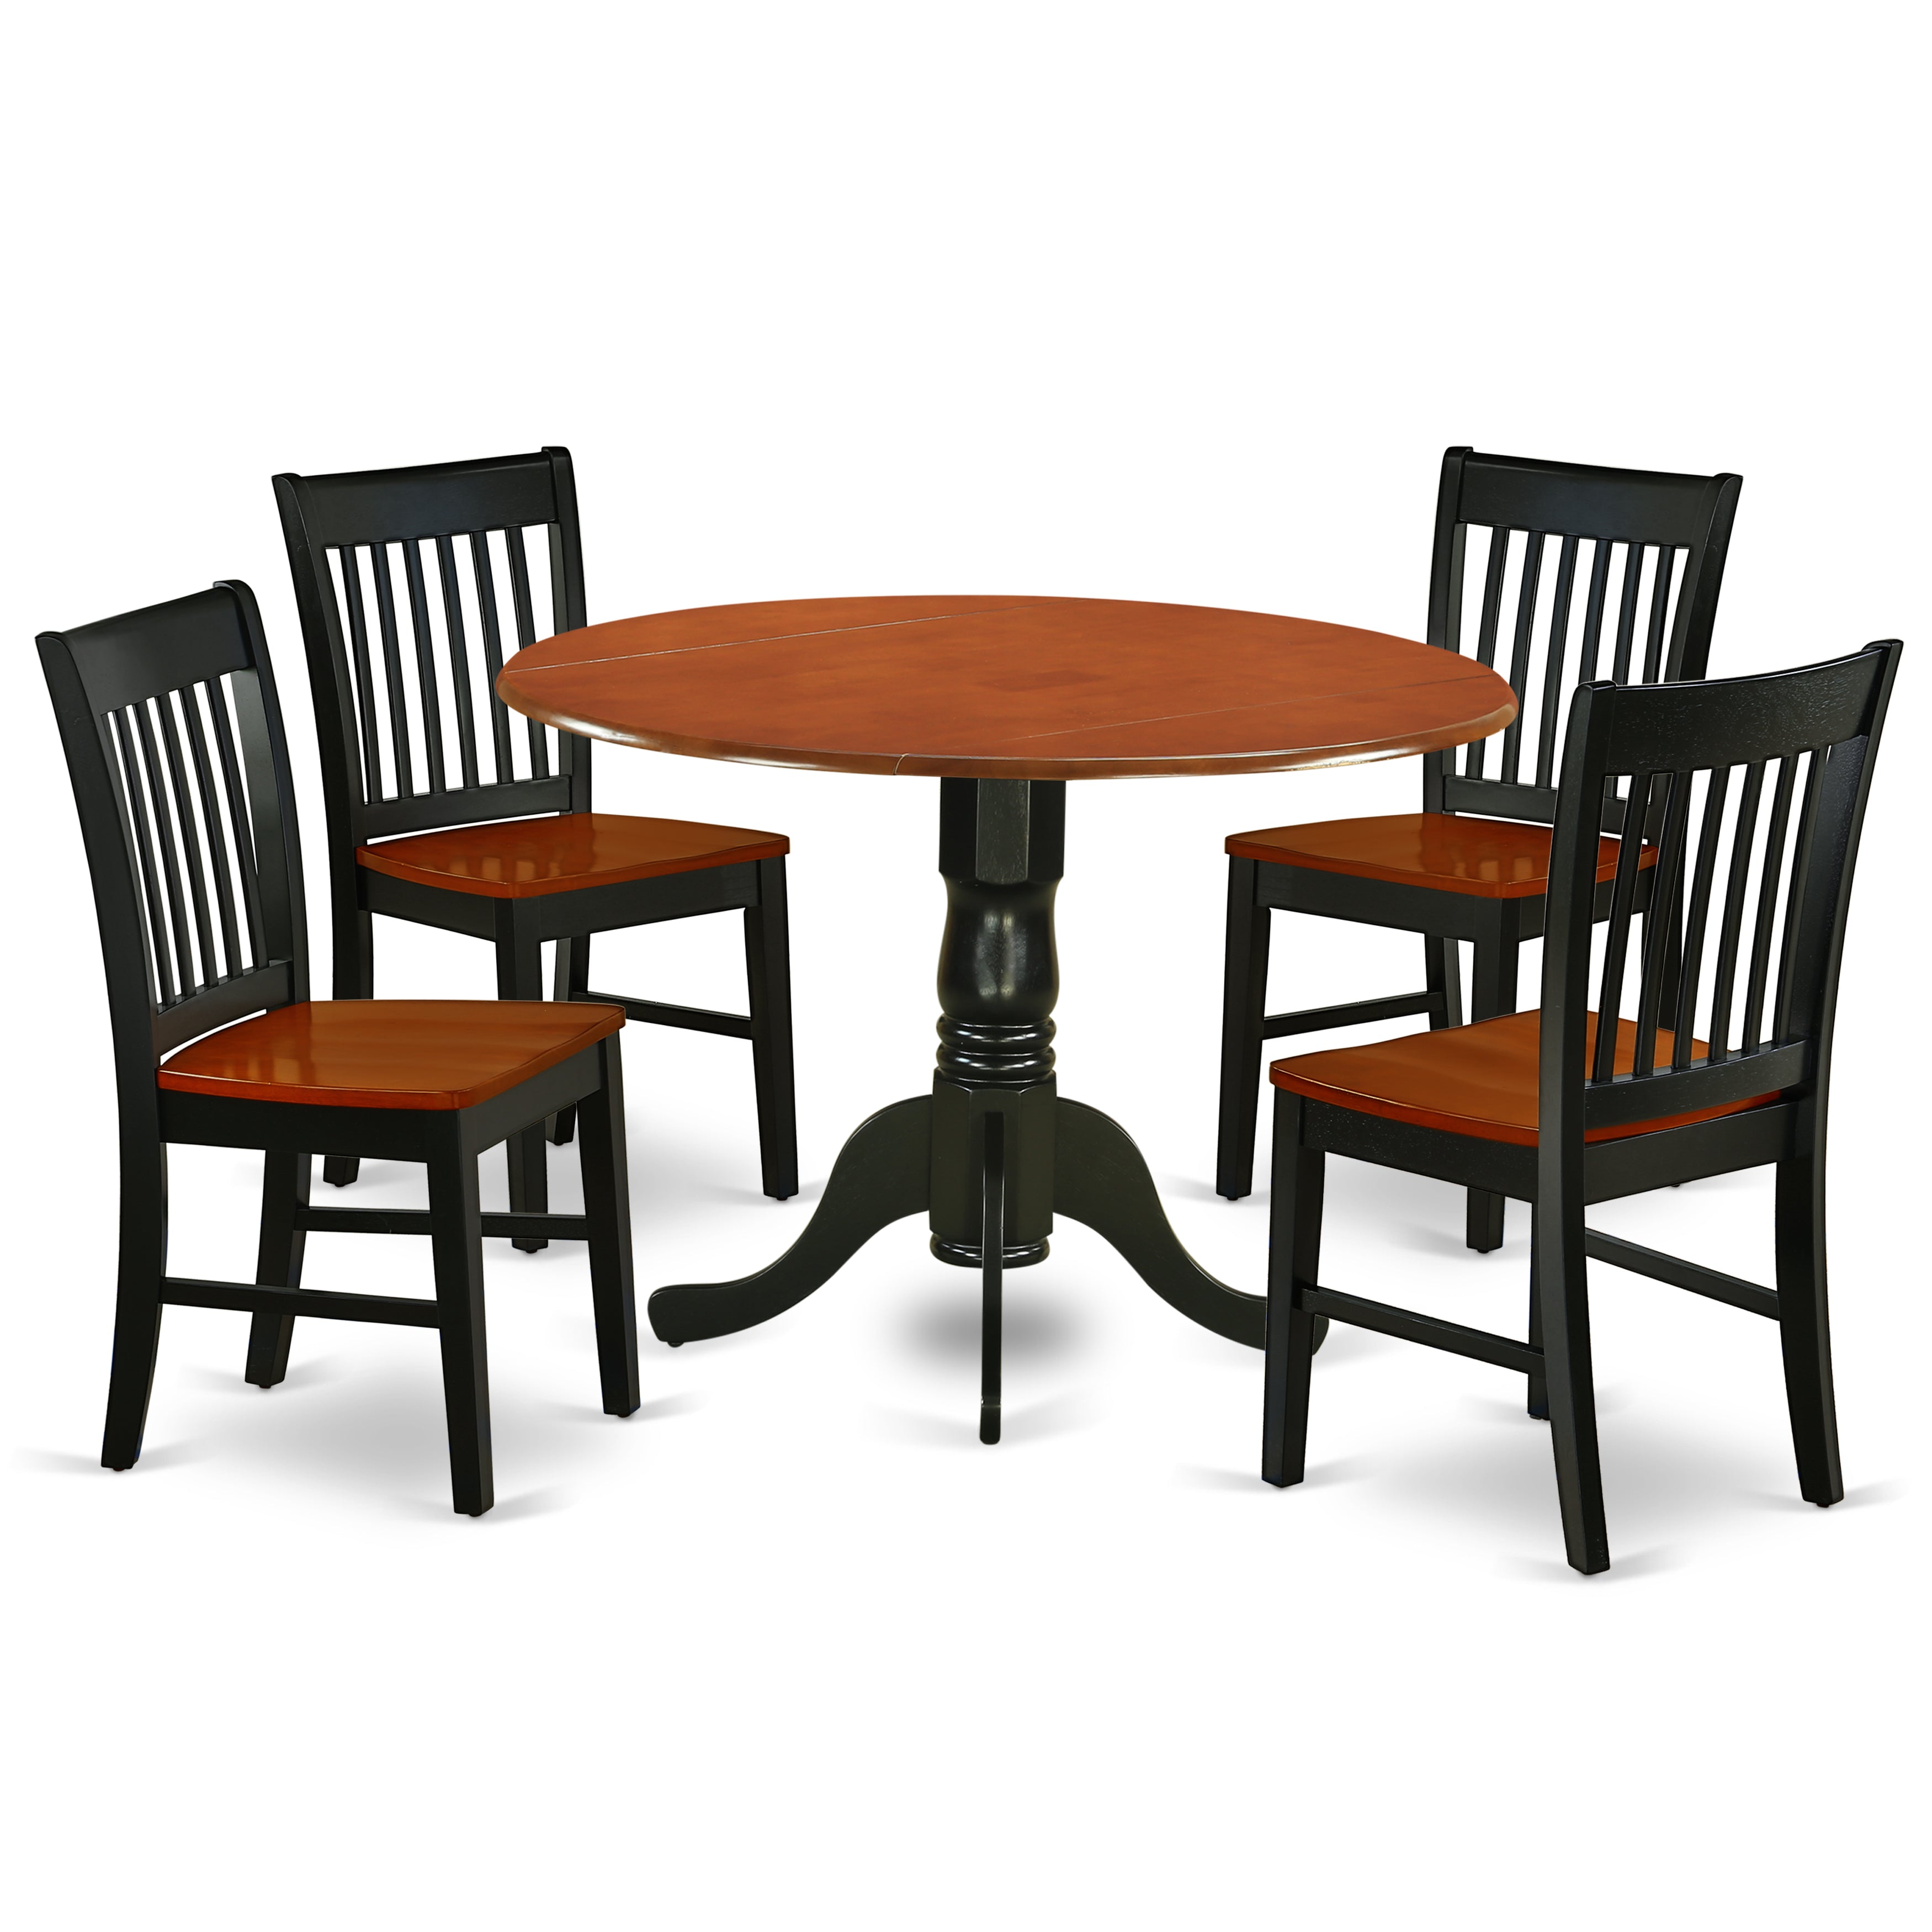 DLNO5-BCH-W 5Pc Rounded 42" Kitchen Table With Two 9-Inch Drop Leaves And Four Wood Seat Kitchen Chairs